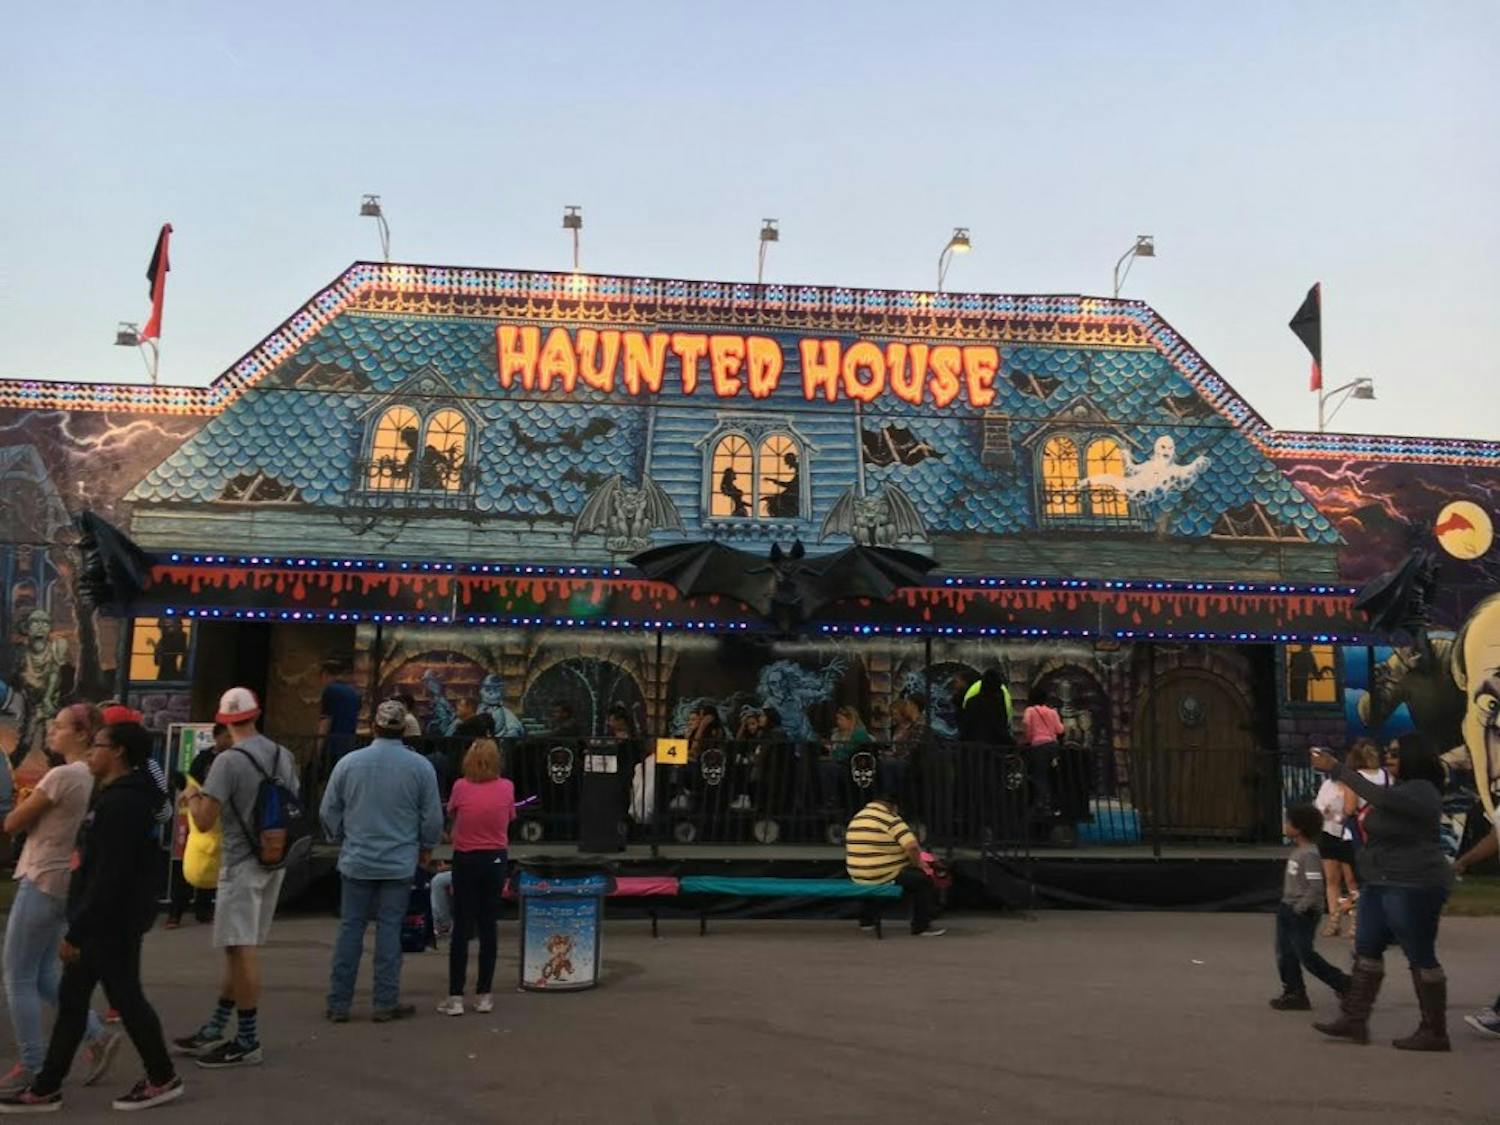 The Haunted House is one of many attractions at the NC State Fair.